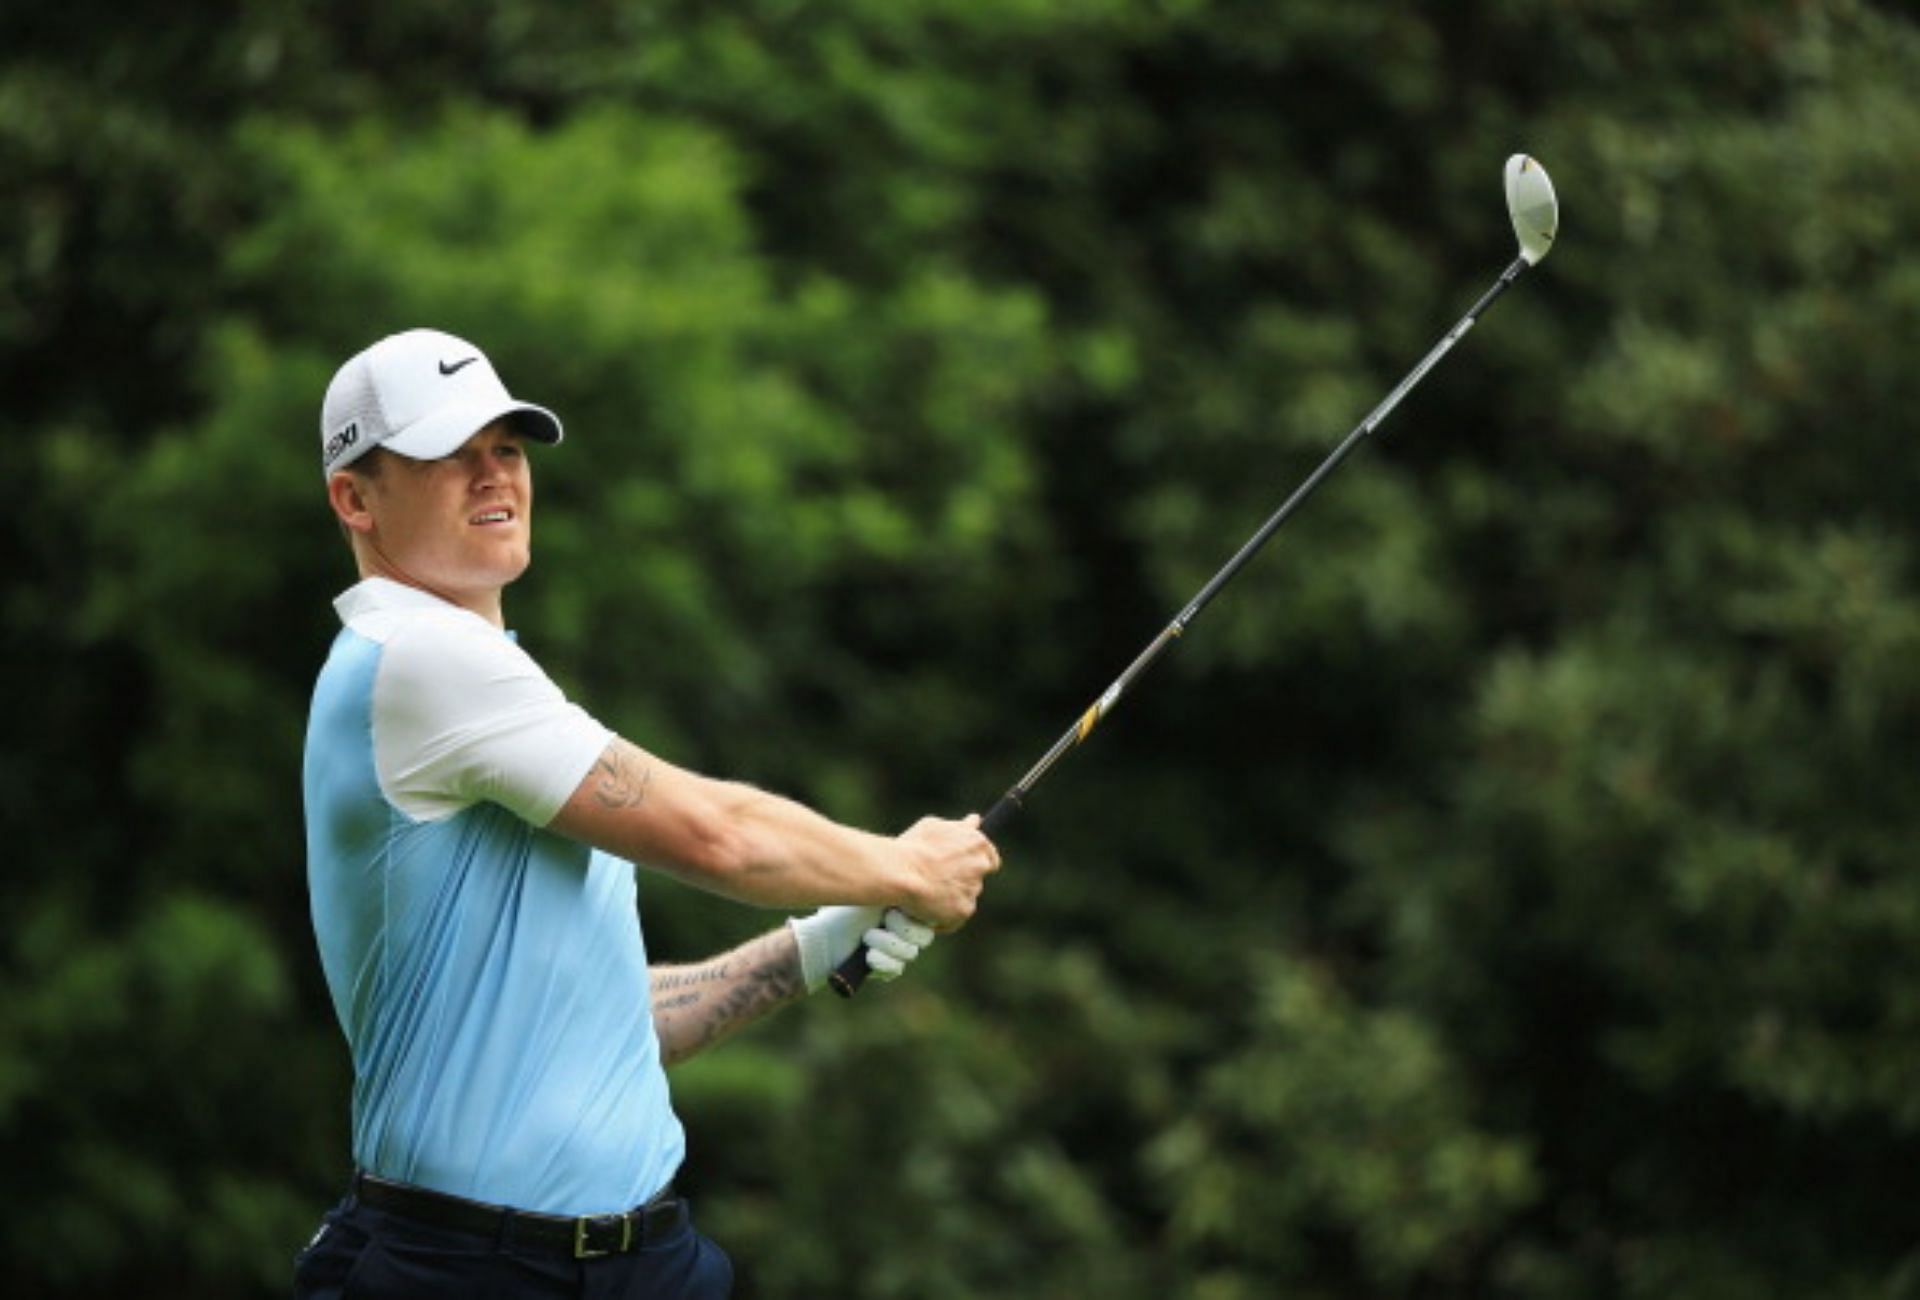 John Arne Riise is a well known amateur golfer (Image via Getty).